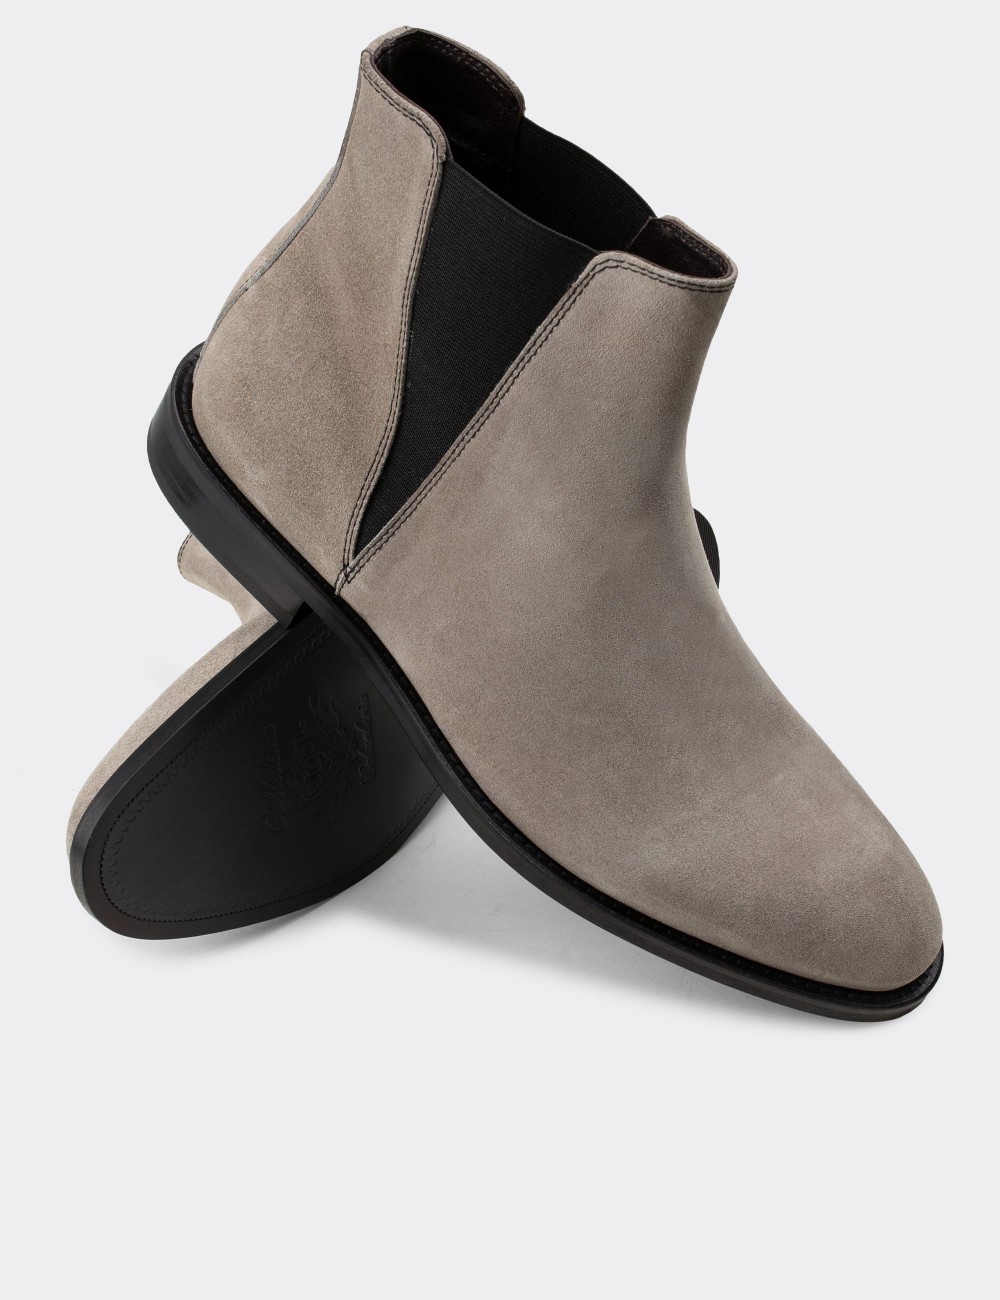 Gray Suede Leather Chelsea Boots - 01689MGRIM01